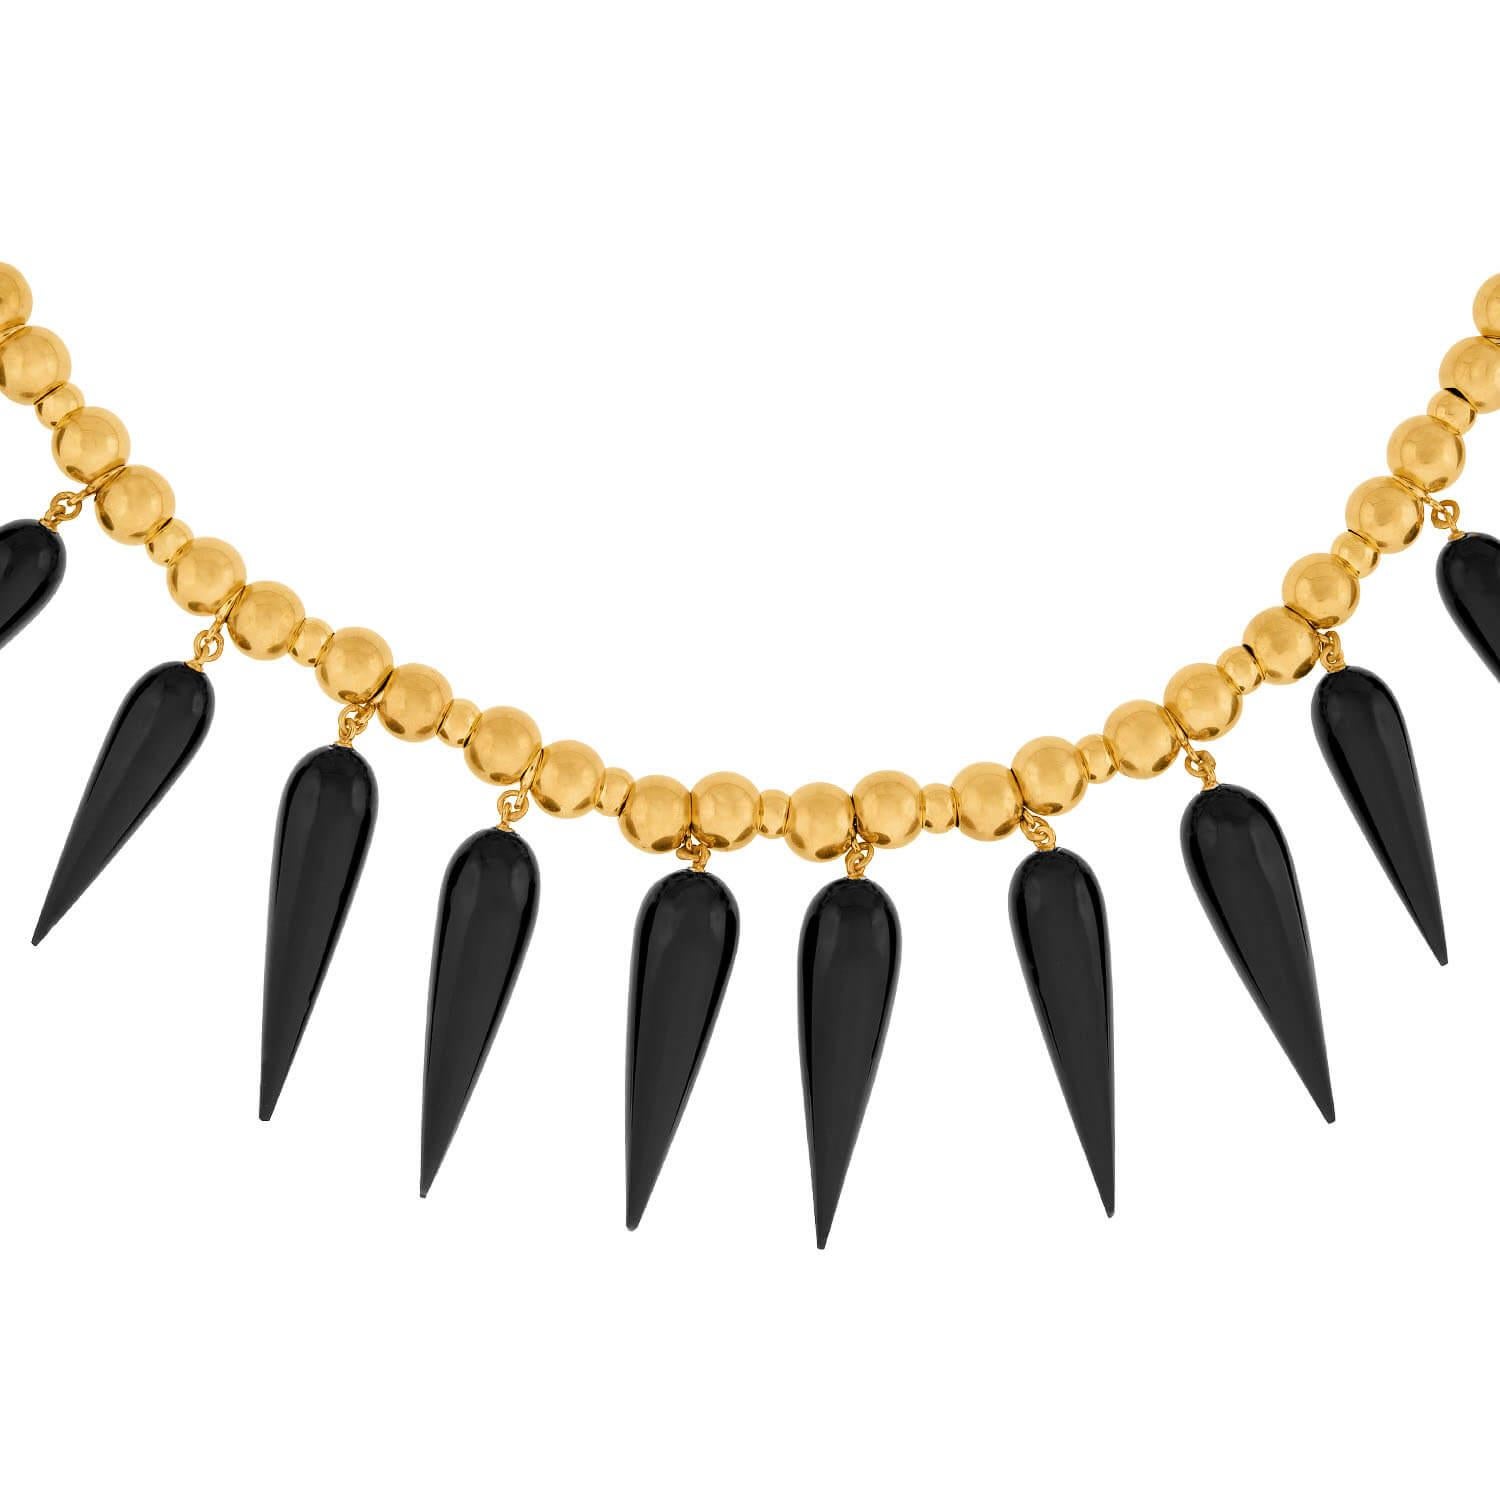 An absolutely stunning mourning necklace from the Victorian (ca1880) era. Crafted in vibrant 18k yellow gold, the necklace is comprised of a single strand of graduated gold beads which are strung on a gold chain. At the center of the necklace are 22